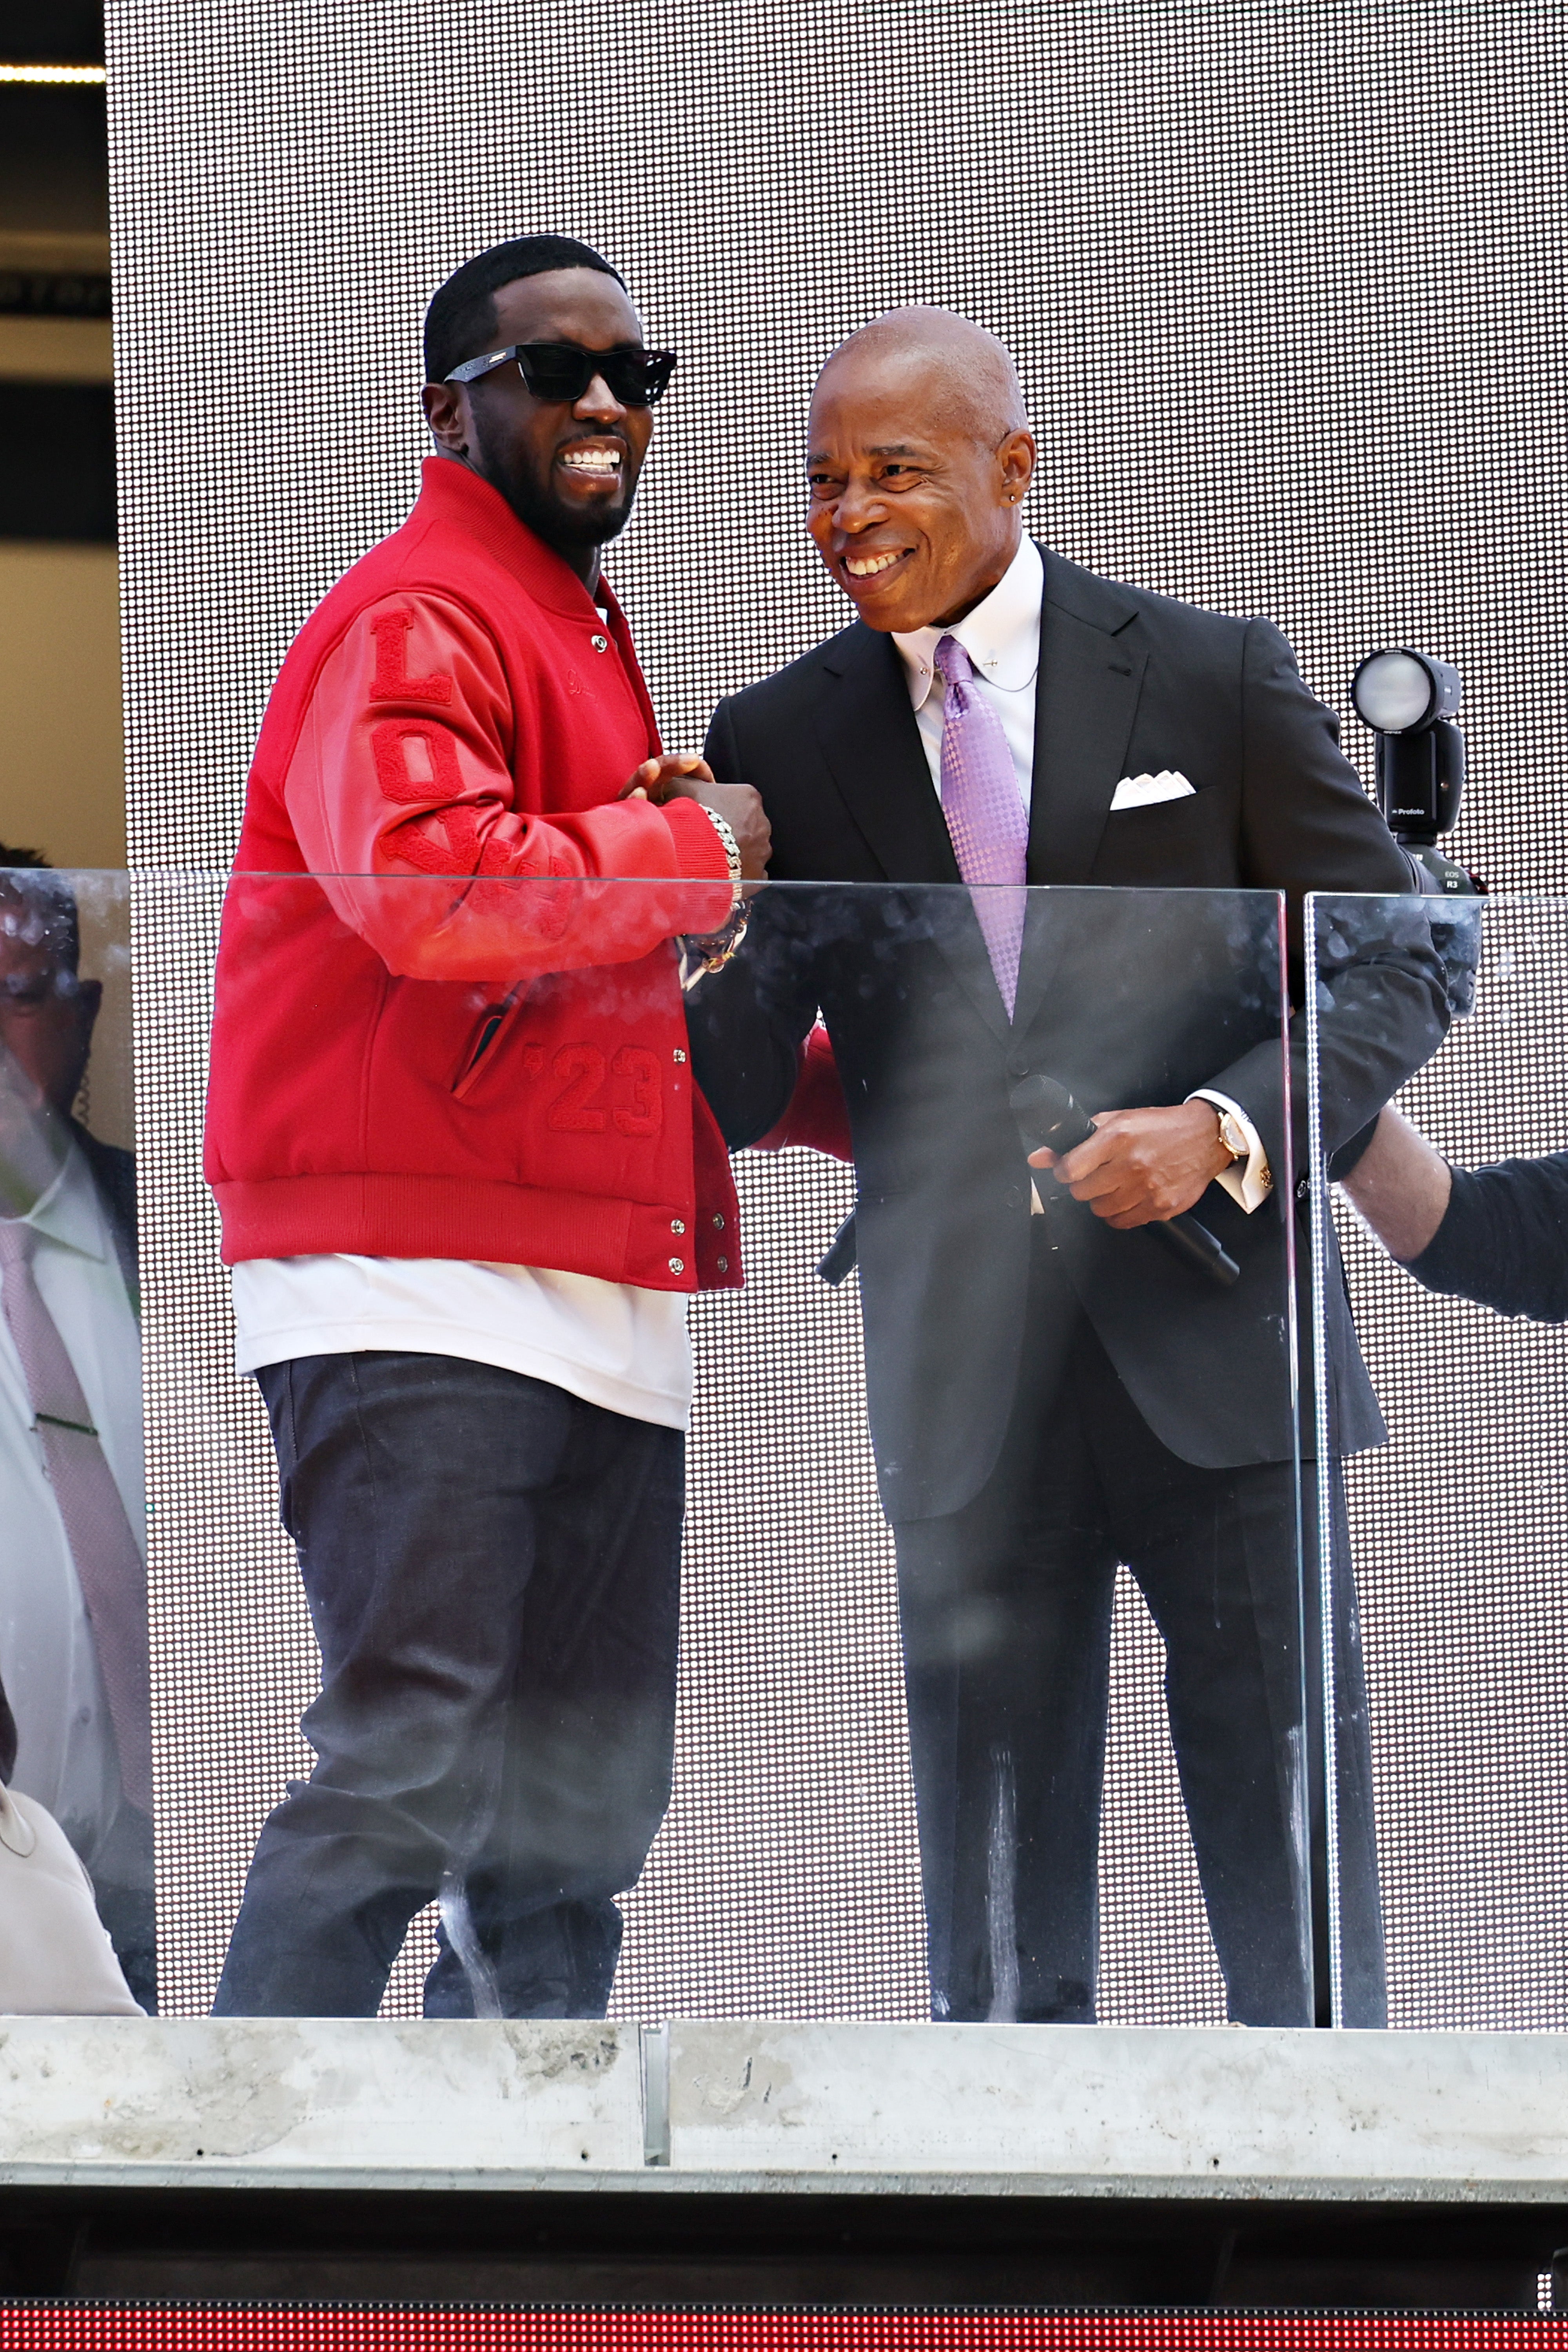 New York Mayor Eric Adams presents Sean ‘Diddy’ Combs with the keys to the city in Times Square on September 15, 2023 in New York City